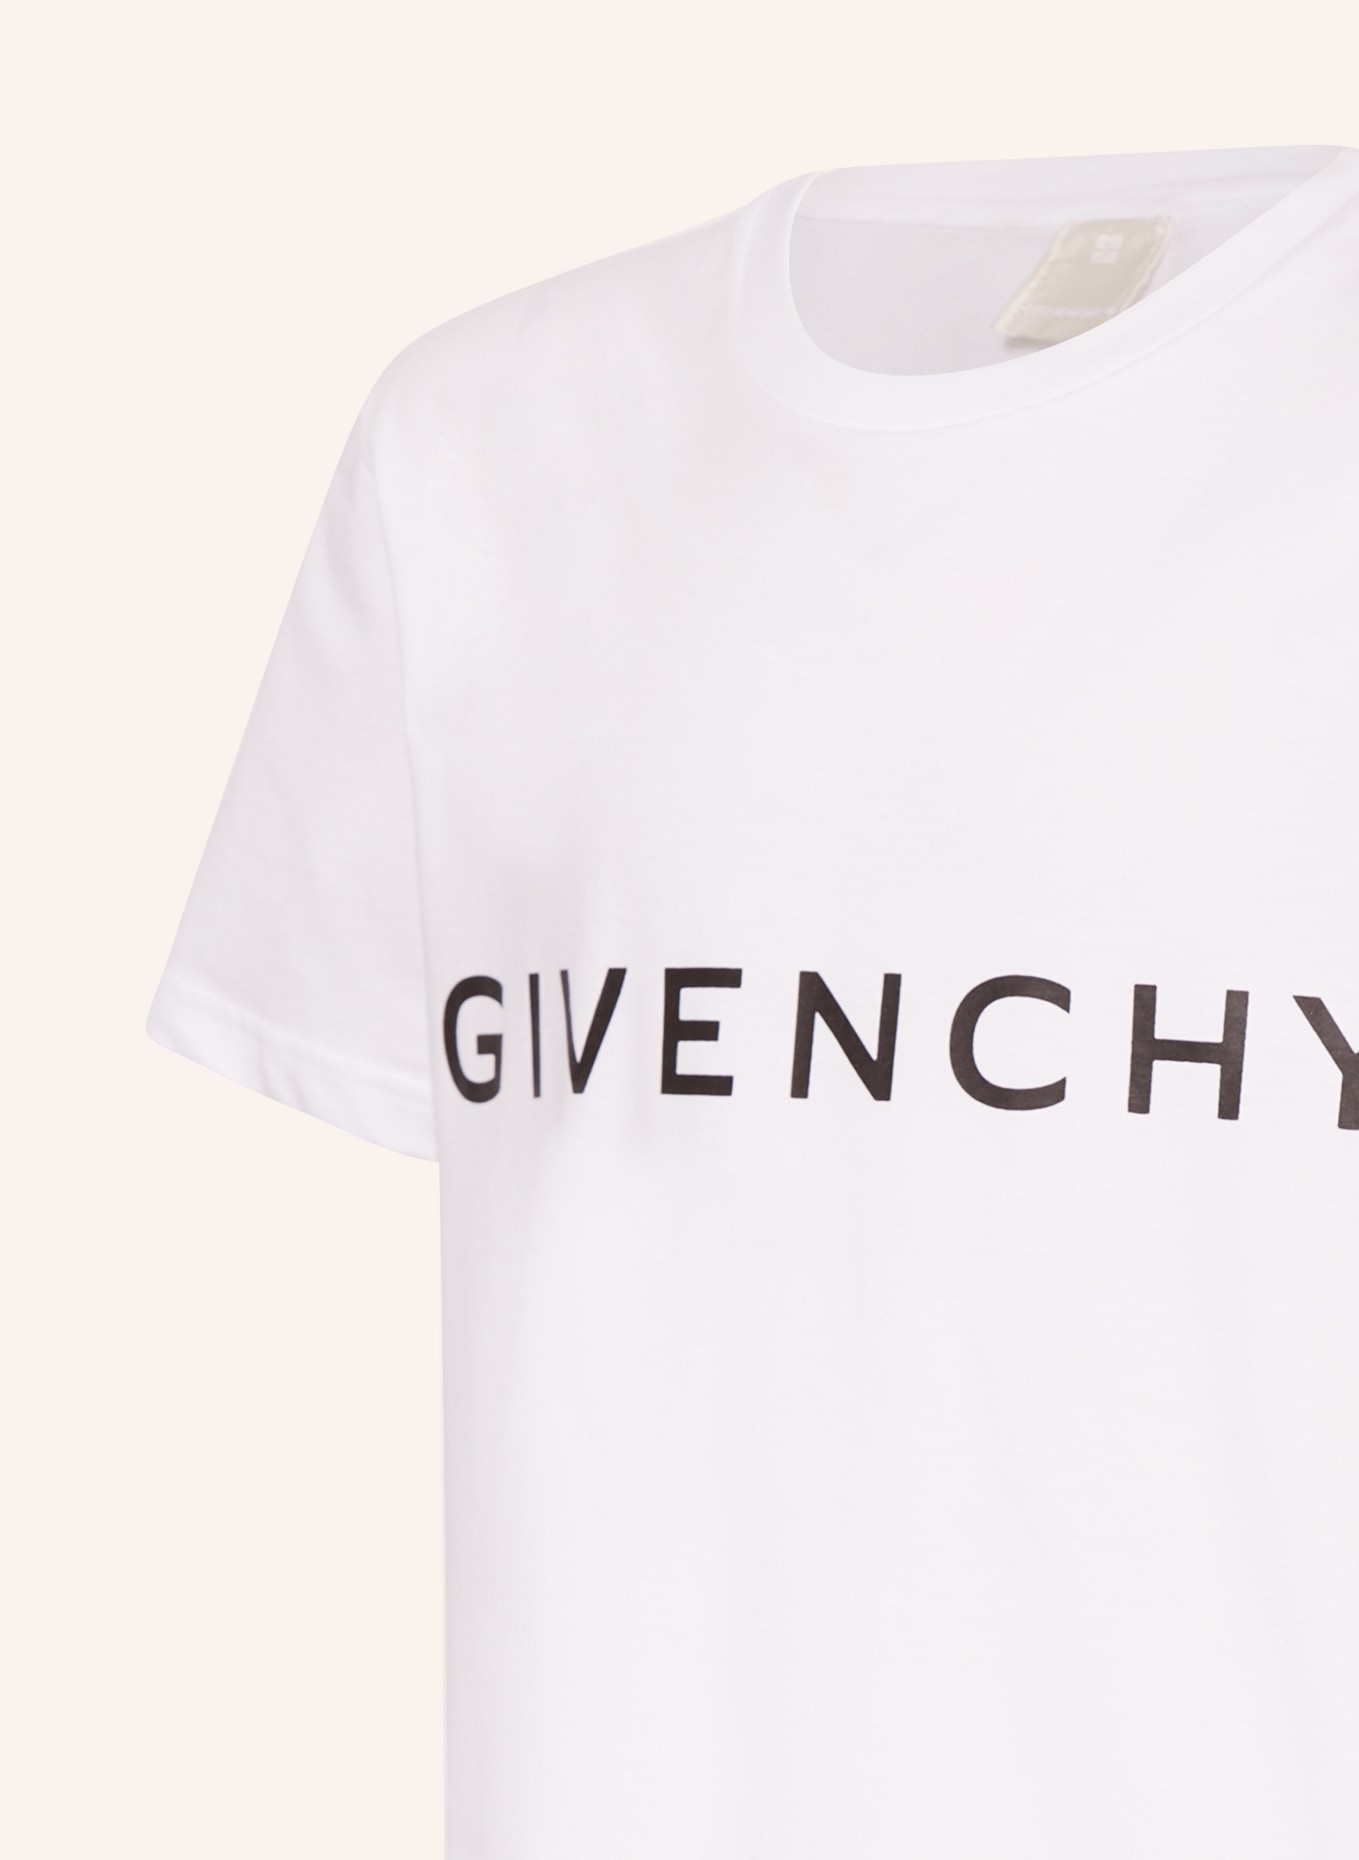 GIVENCHY T-Shirt, Farbe: WEISS (Bild 3)